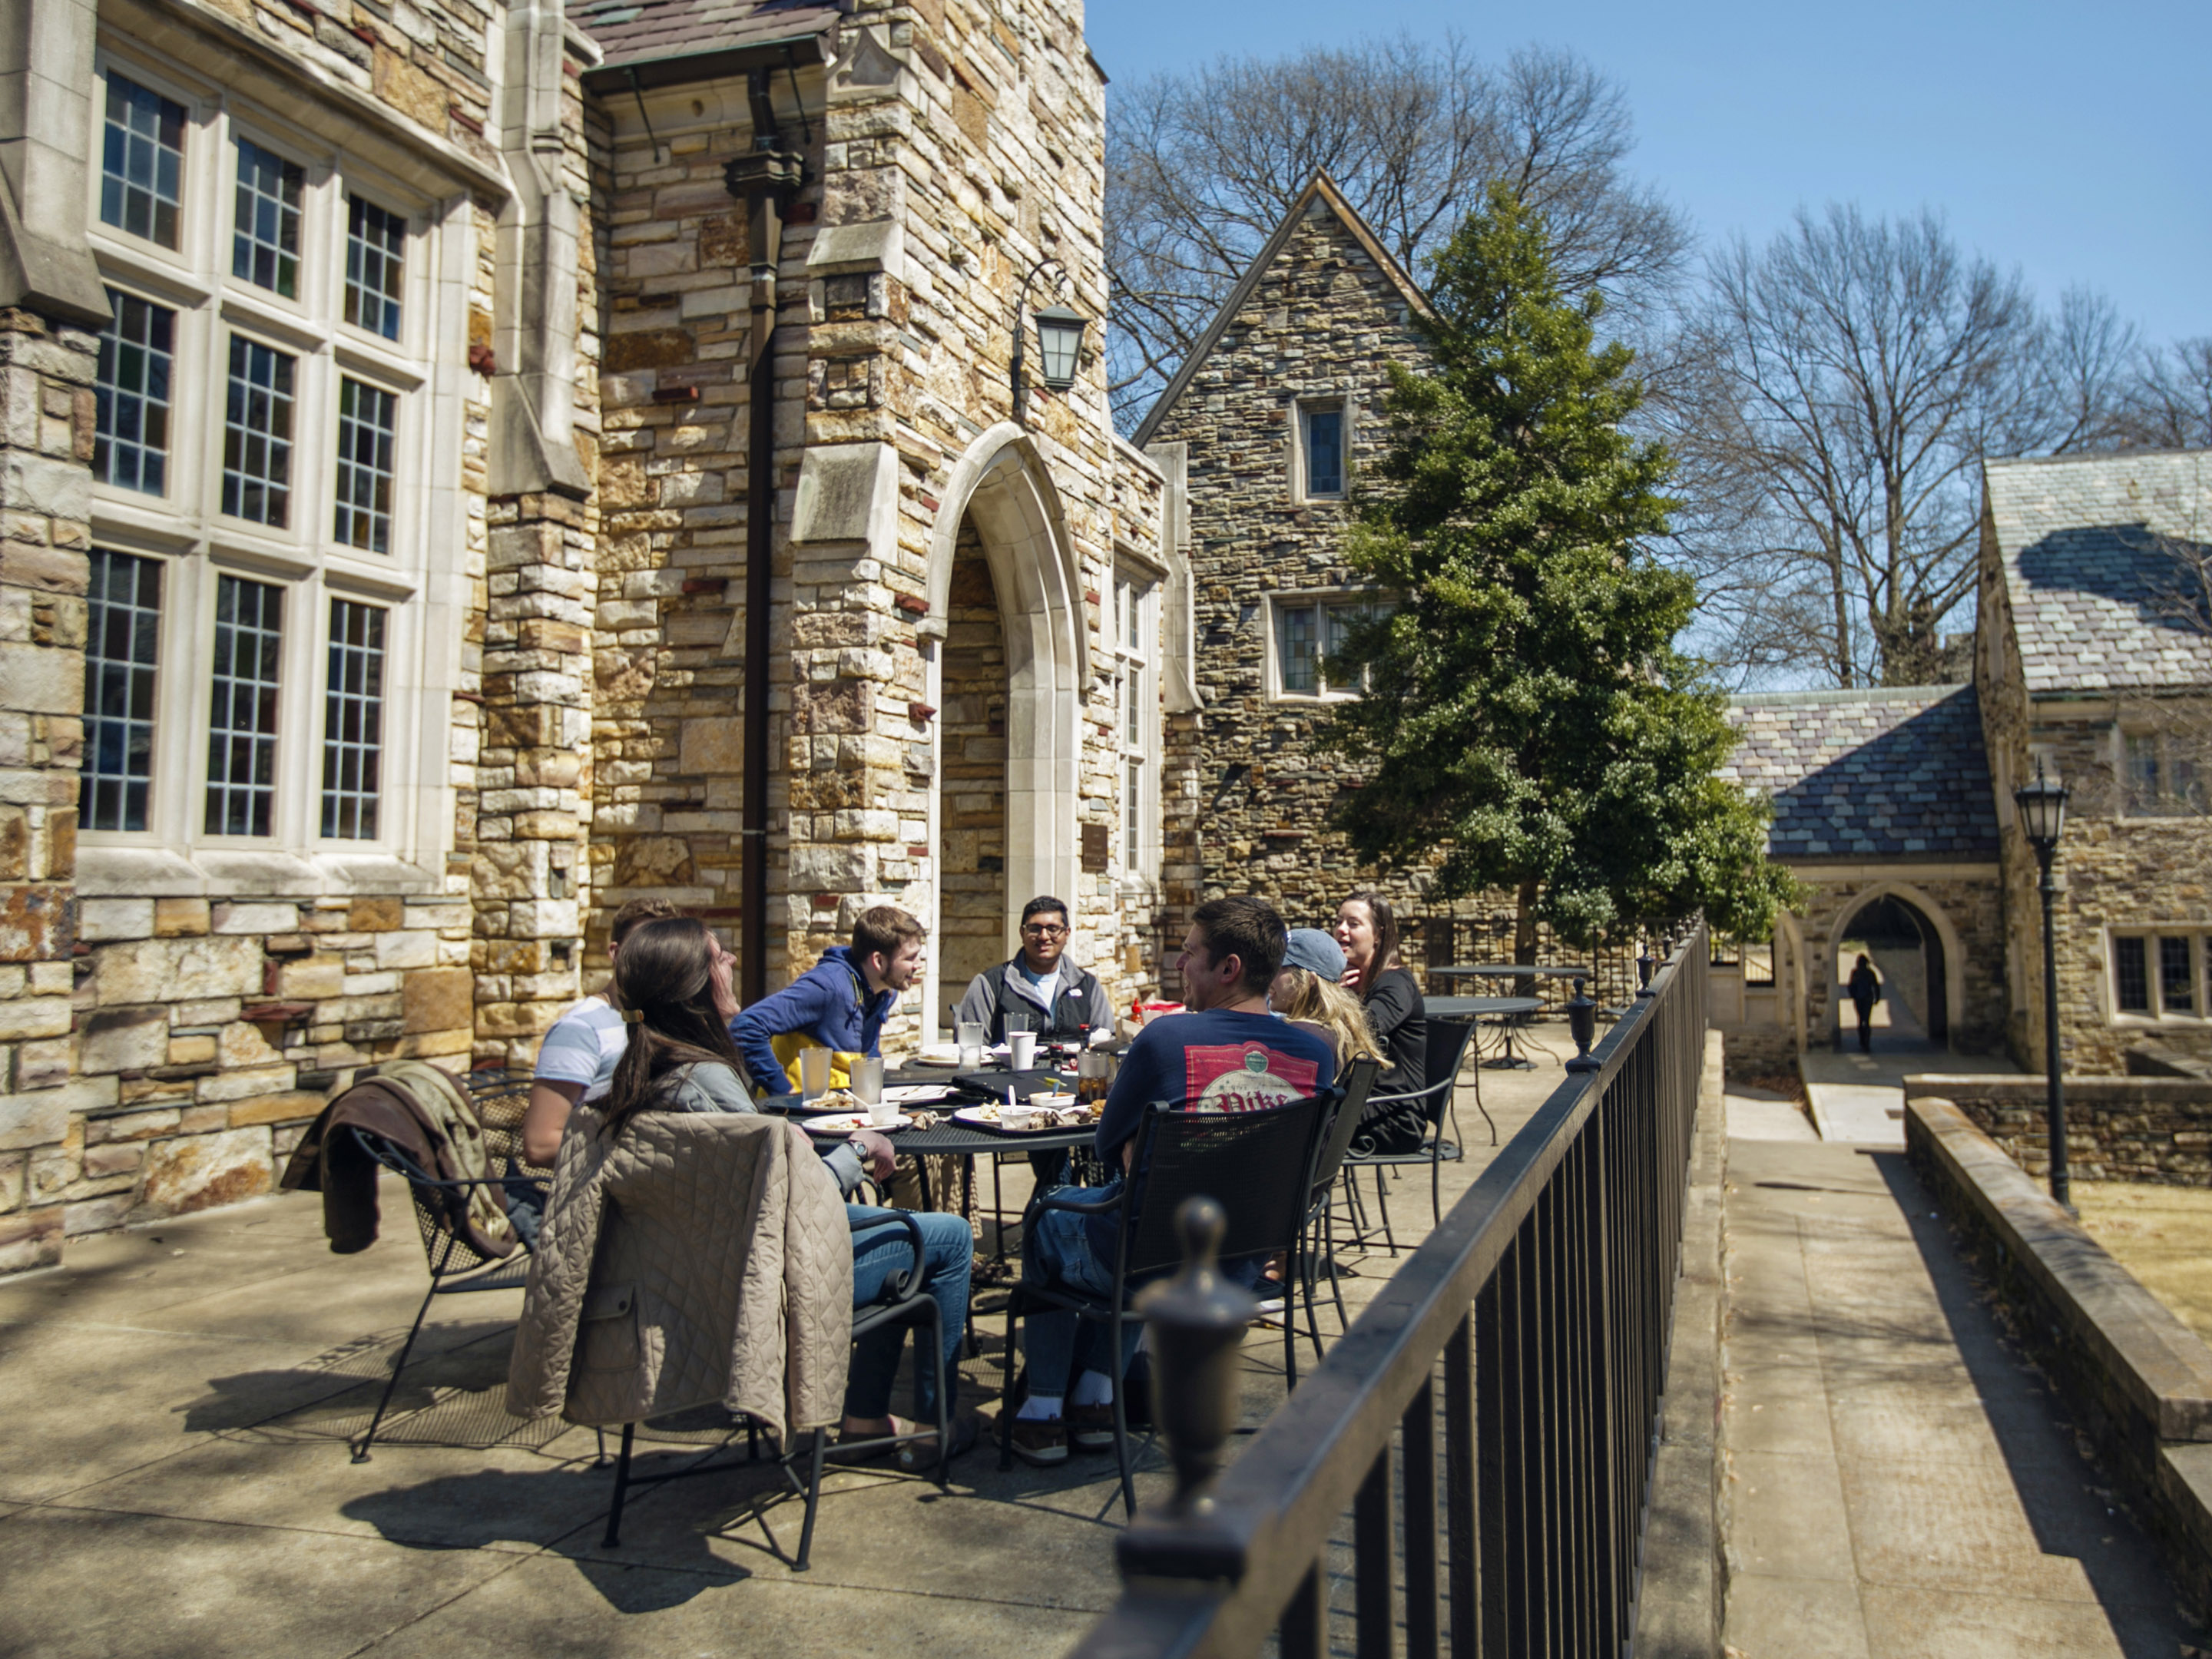 students on a patio of a gothic stone building